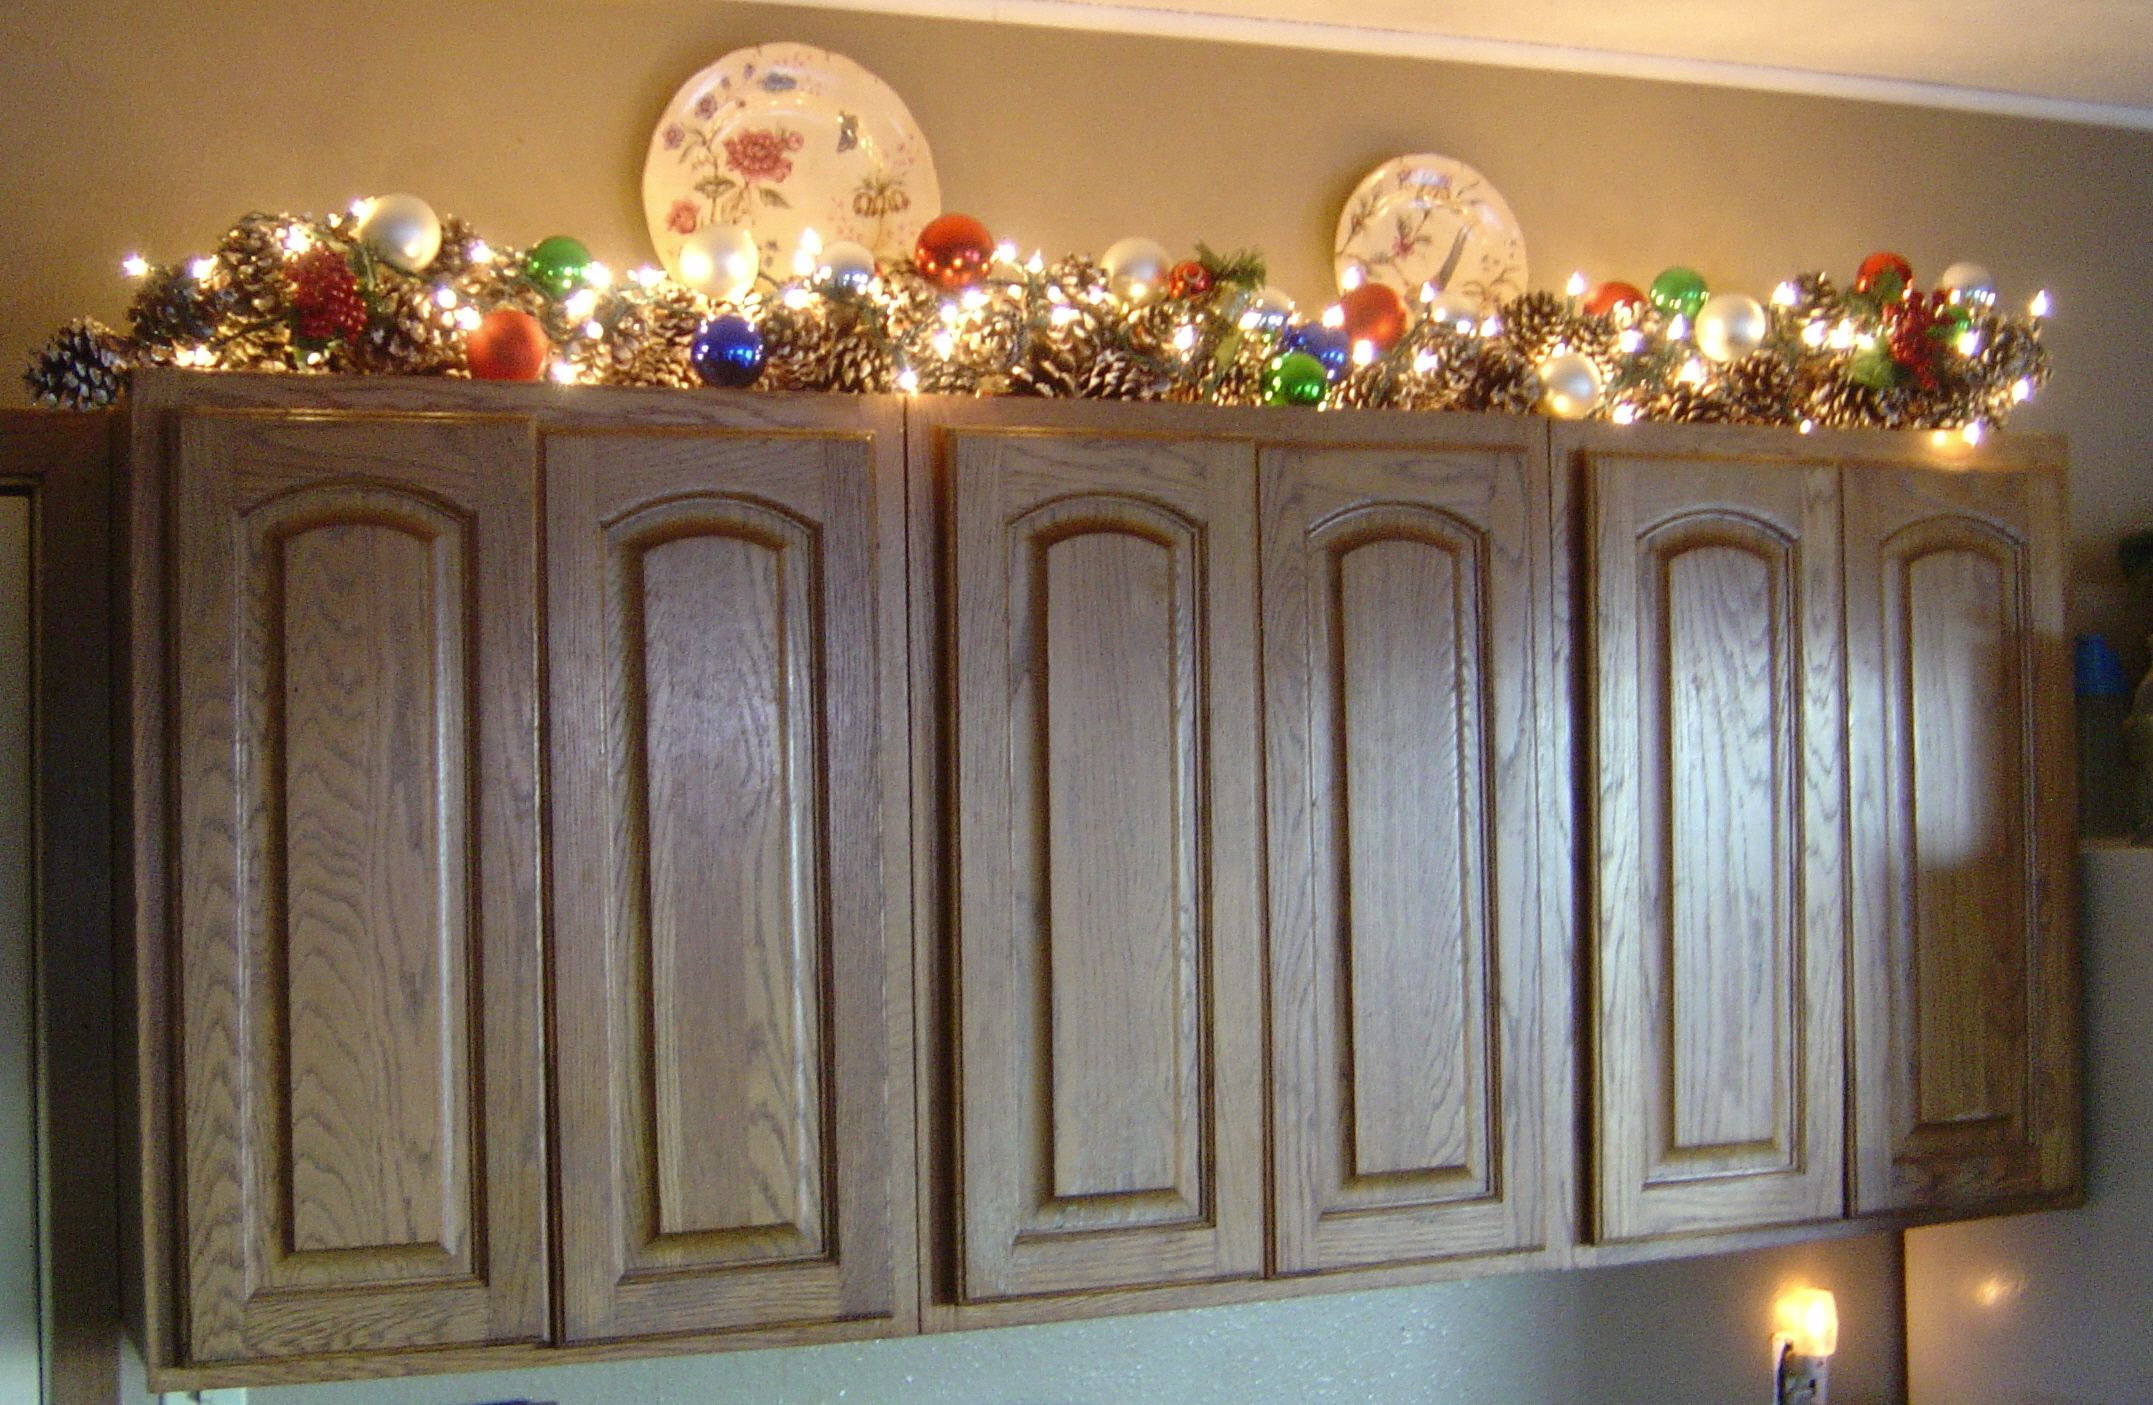 Christmas Cabinet Decorations
 my kitchen cabinets